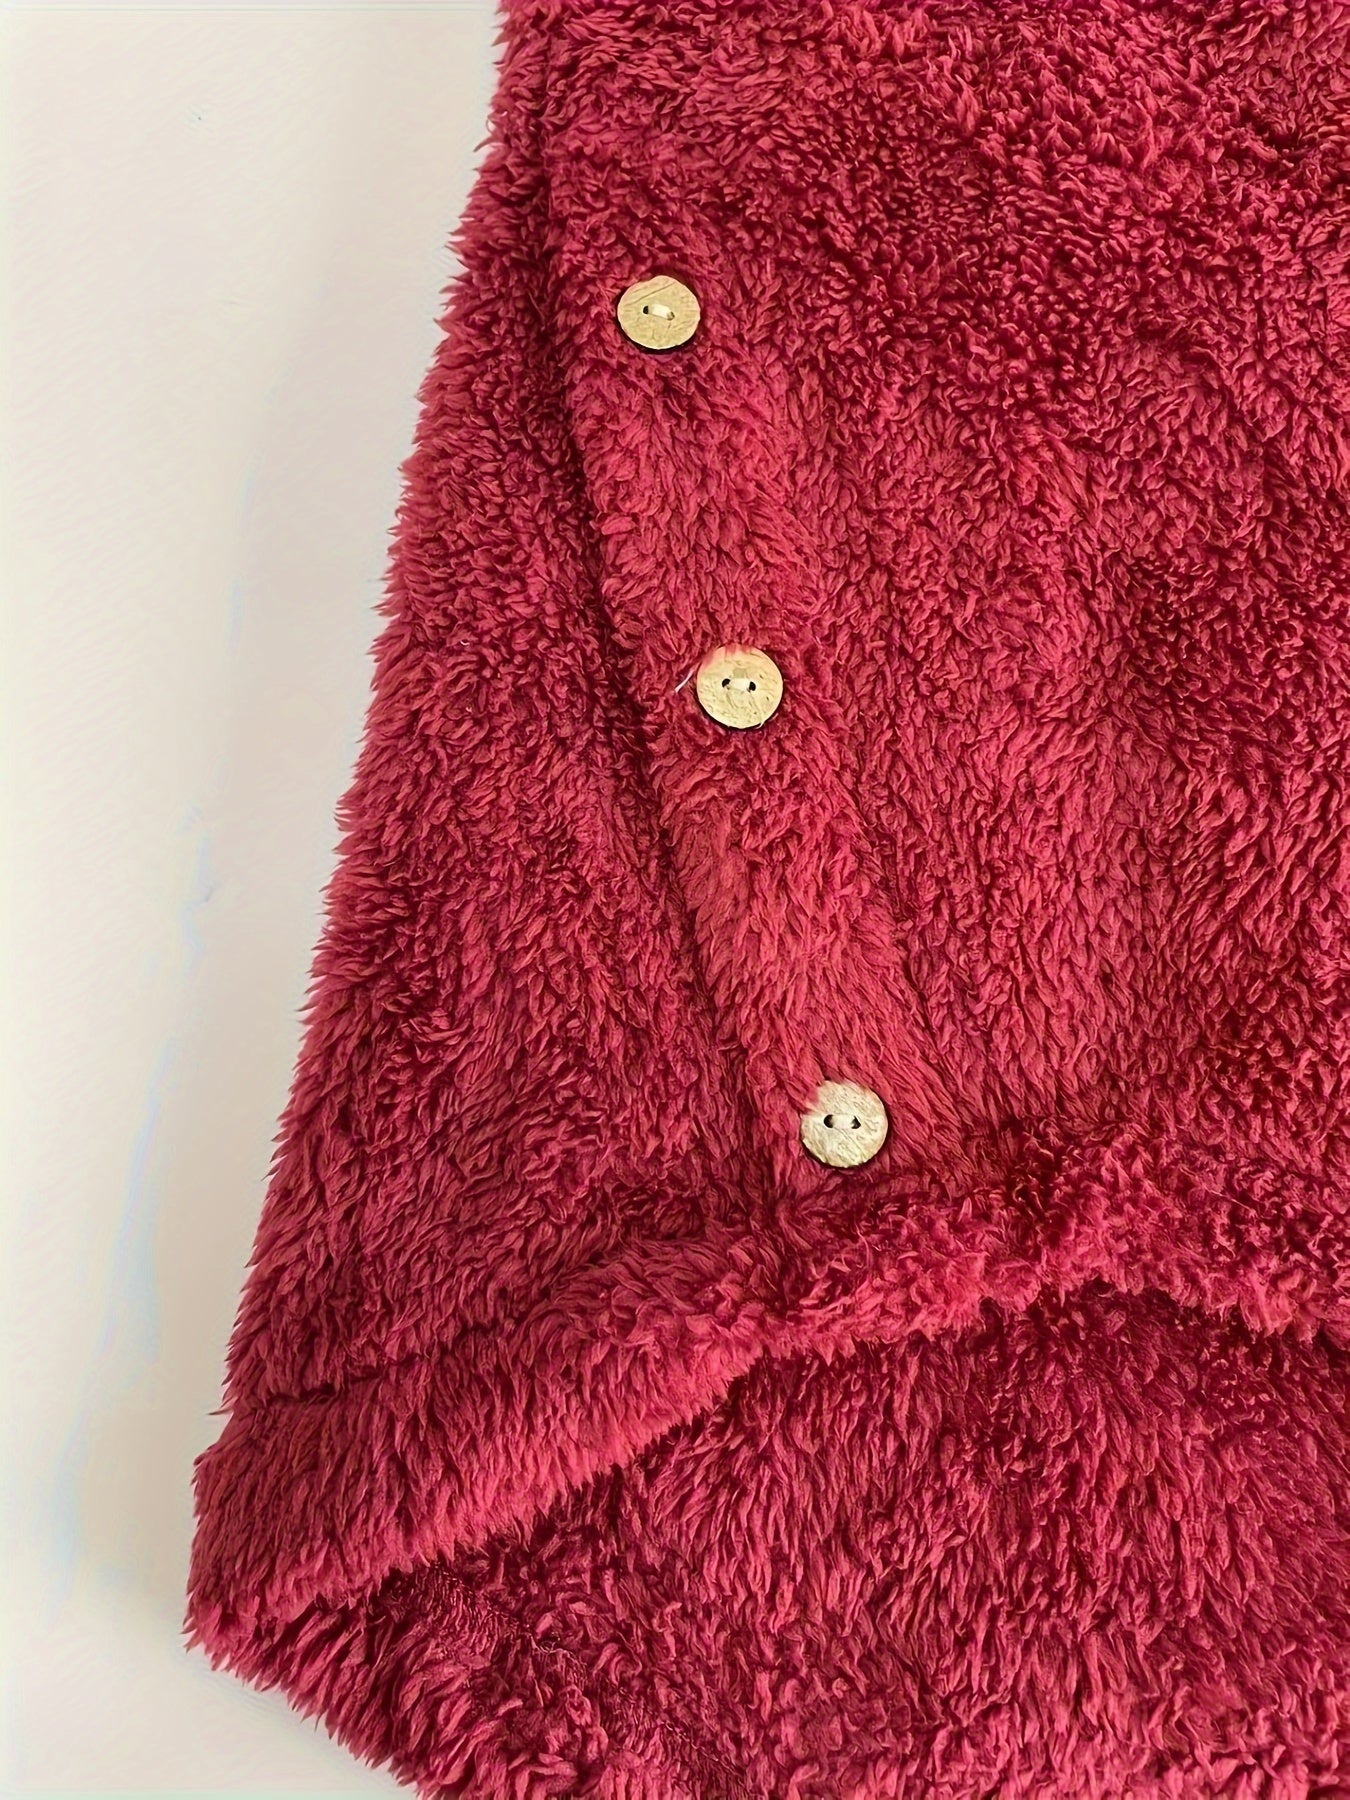 A close-up photo of a red, fuzzy fabric with three white buttons stitched along one edge, reminiscent of the Maramalive™ Plus Size Casual Sweatshirt, Women's Plus Slogan & Cat Print Fleece Button Decor Long Sleeve Cat Ear Button Decor Sweatshirt With Pockets.